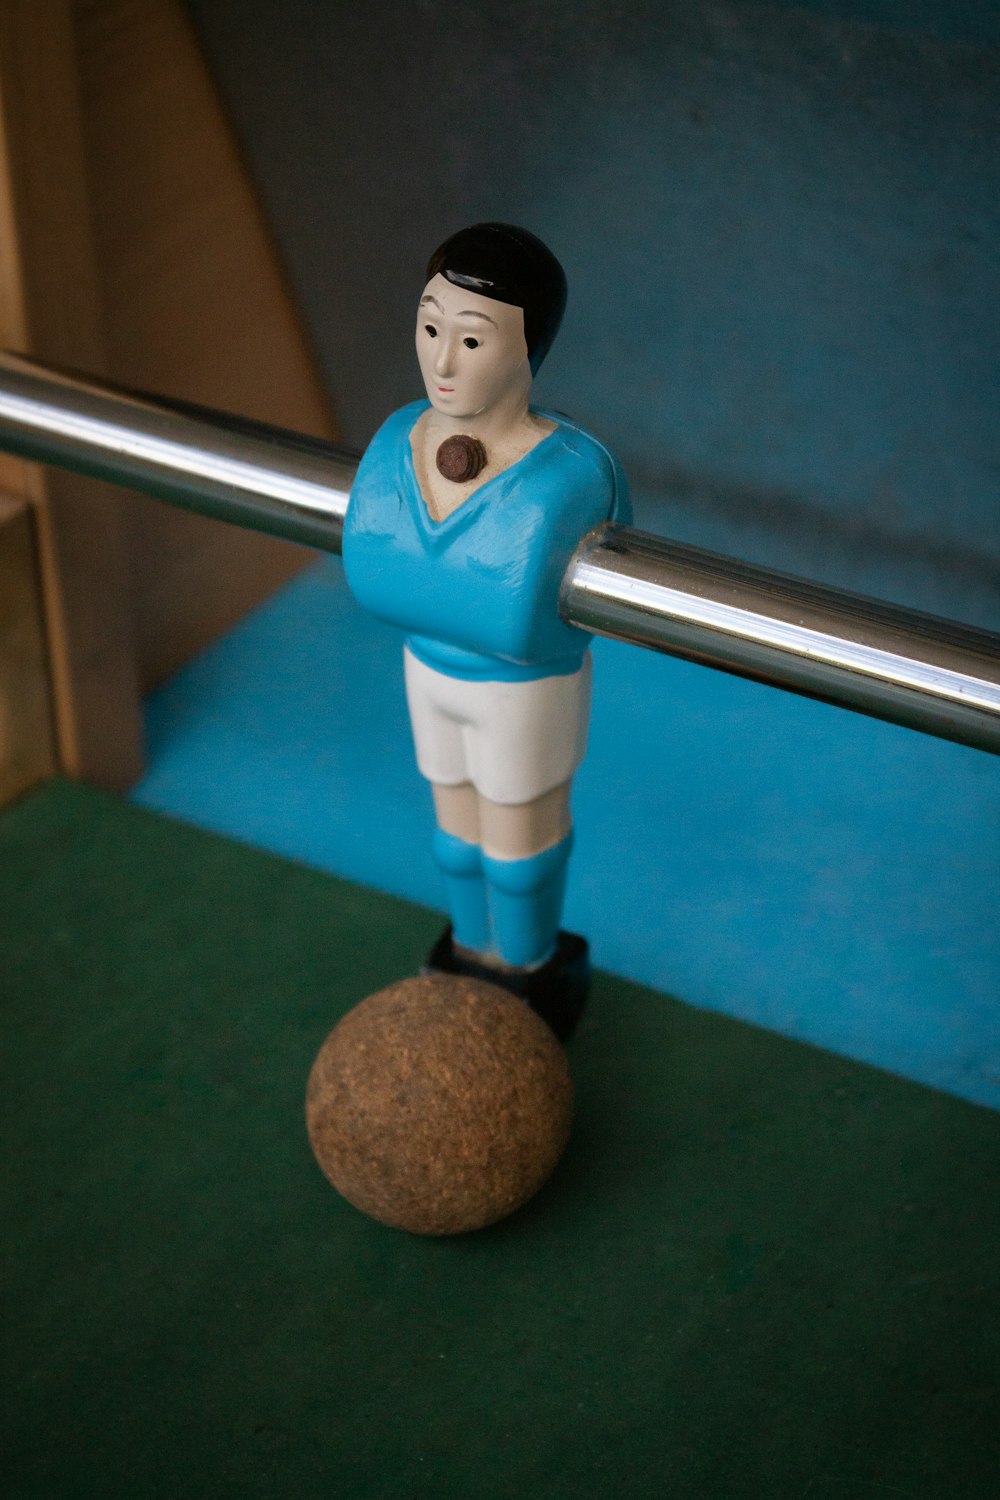 a figurine of a man standing on top of a ball